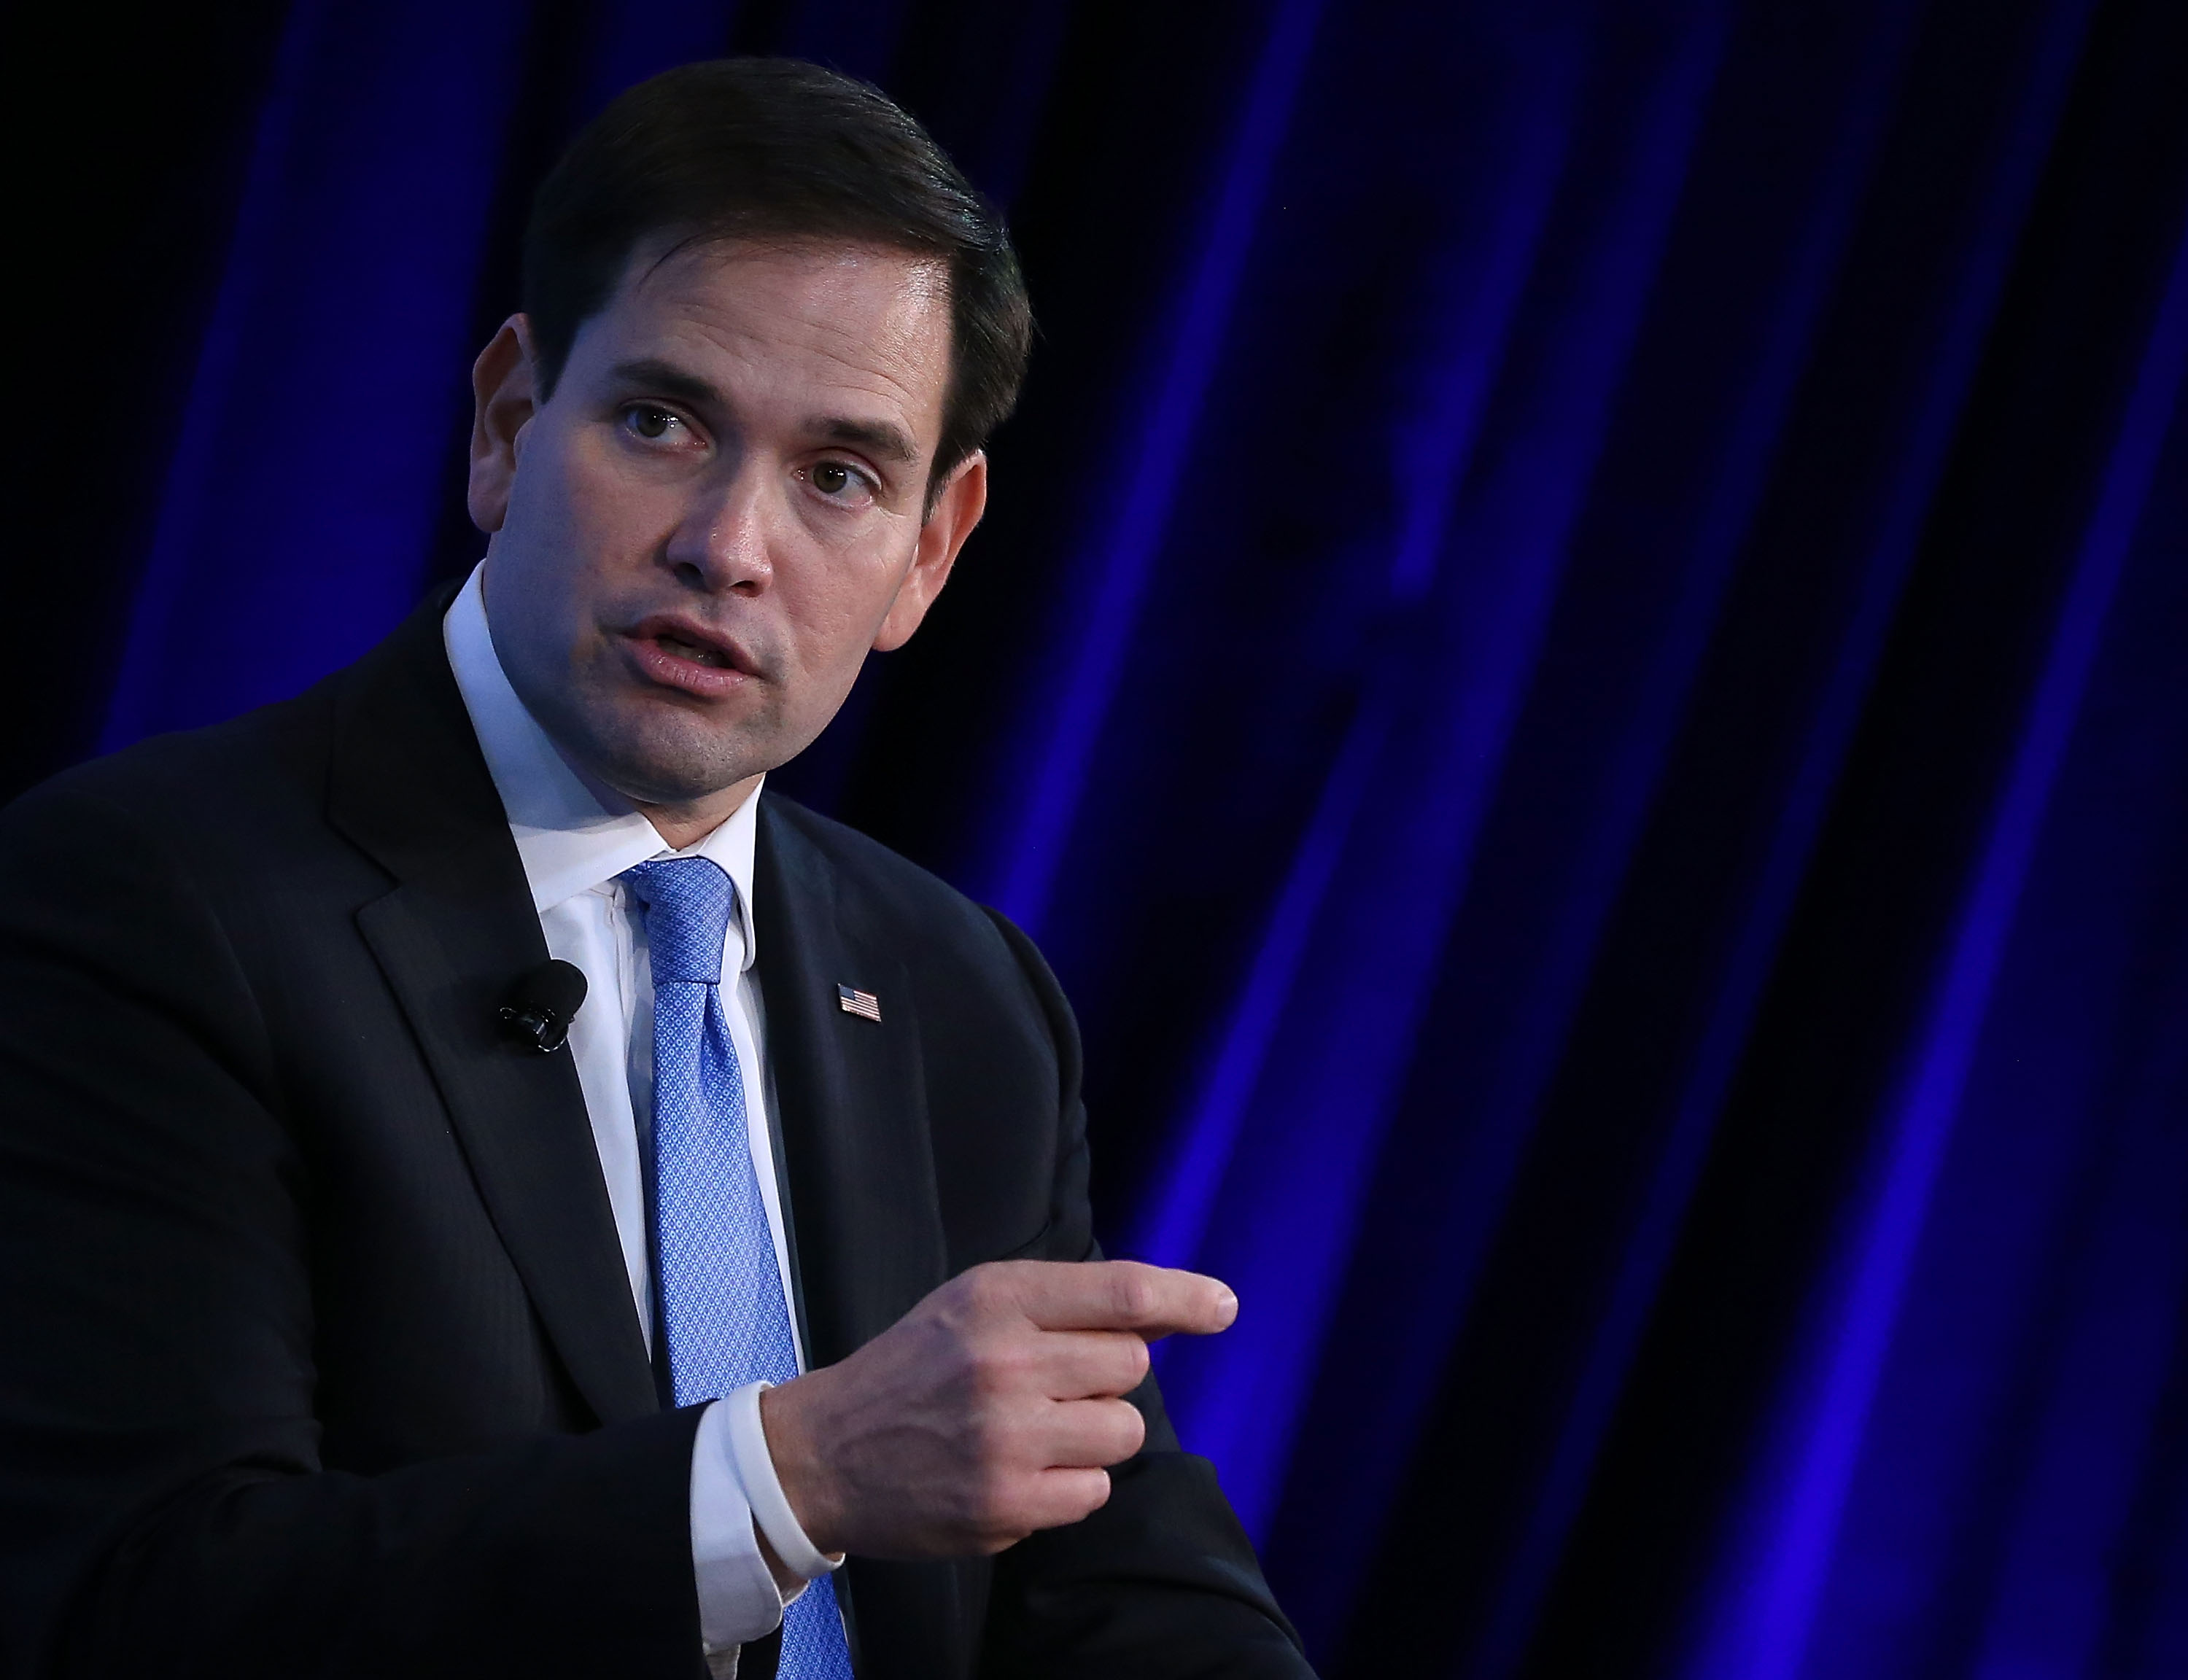 Marco Rubio Attends Wall St Journal CEO Council Annual Meeting